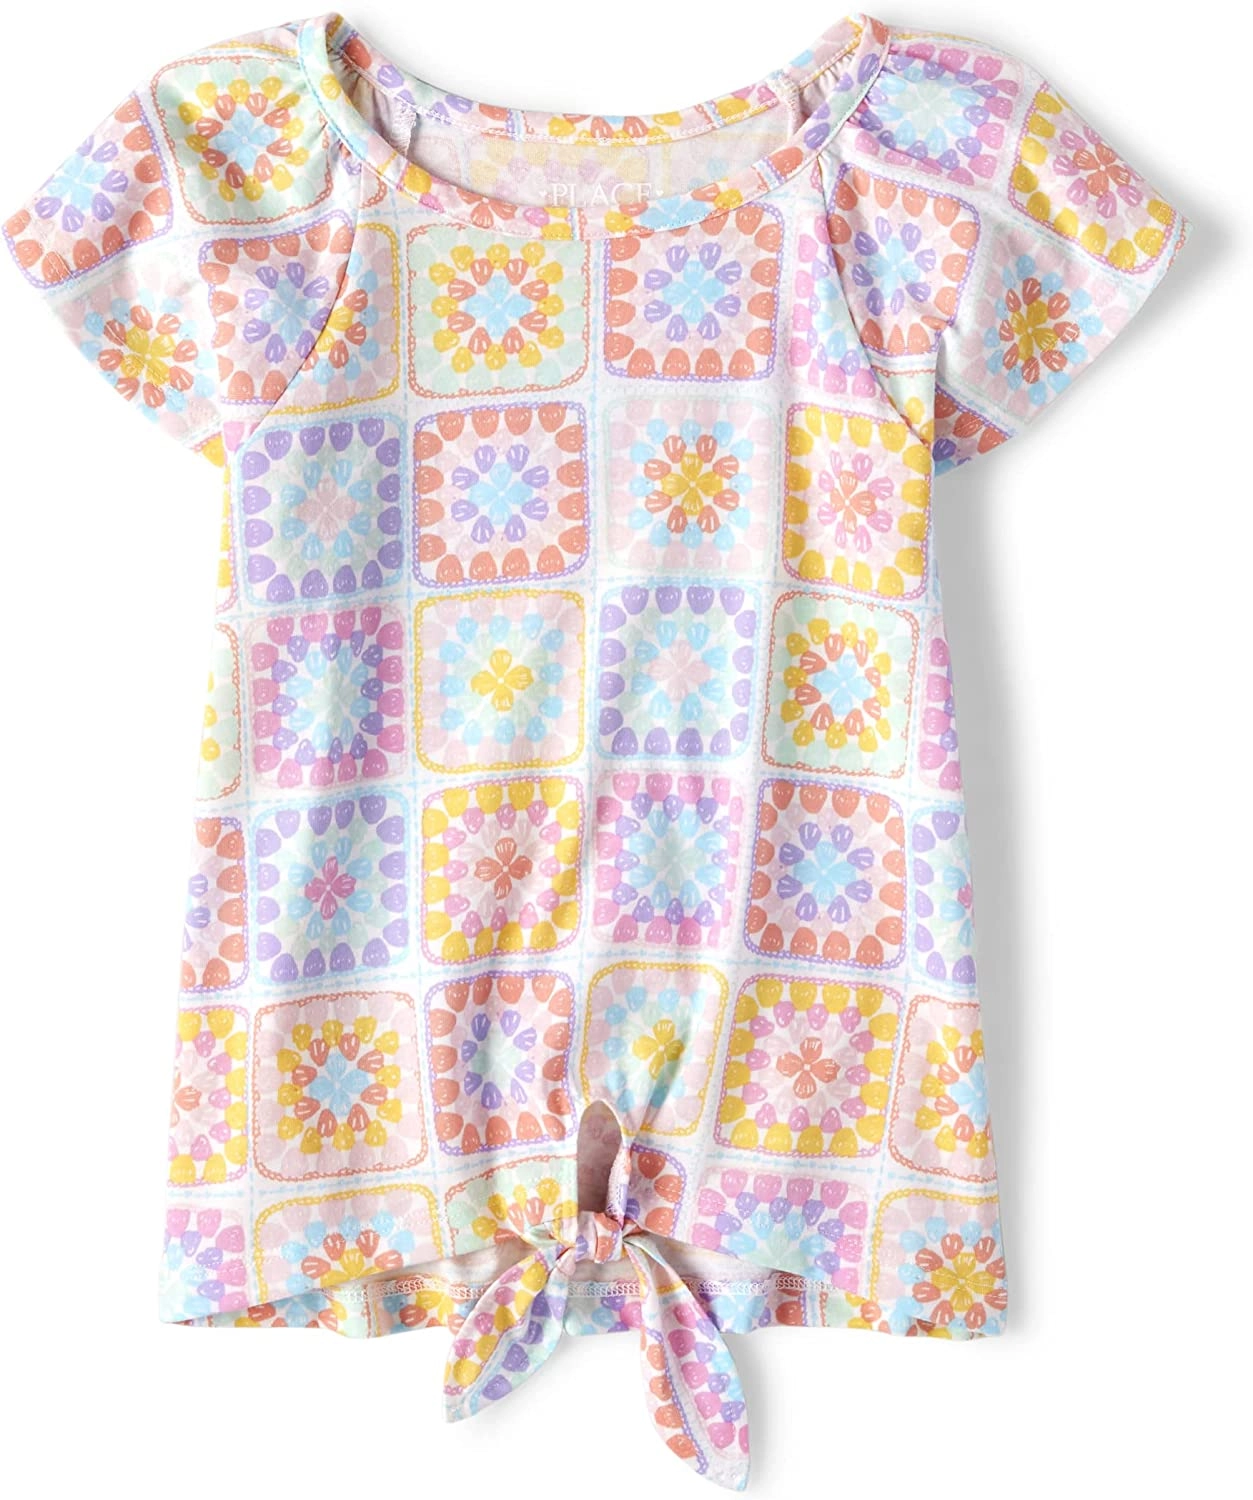 Girls Short Sleeve Tie Front Top From Bangladesh Childrenwear Factory